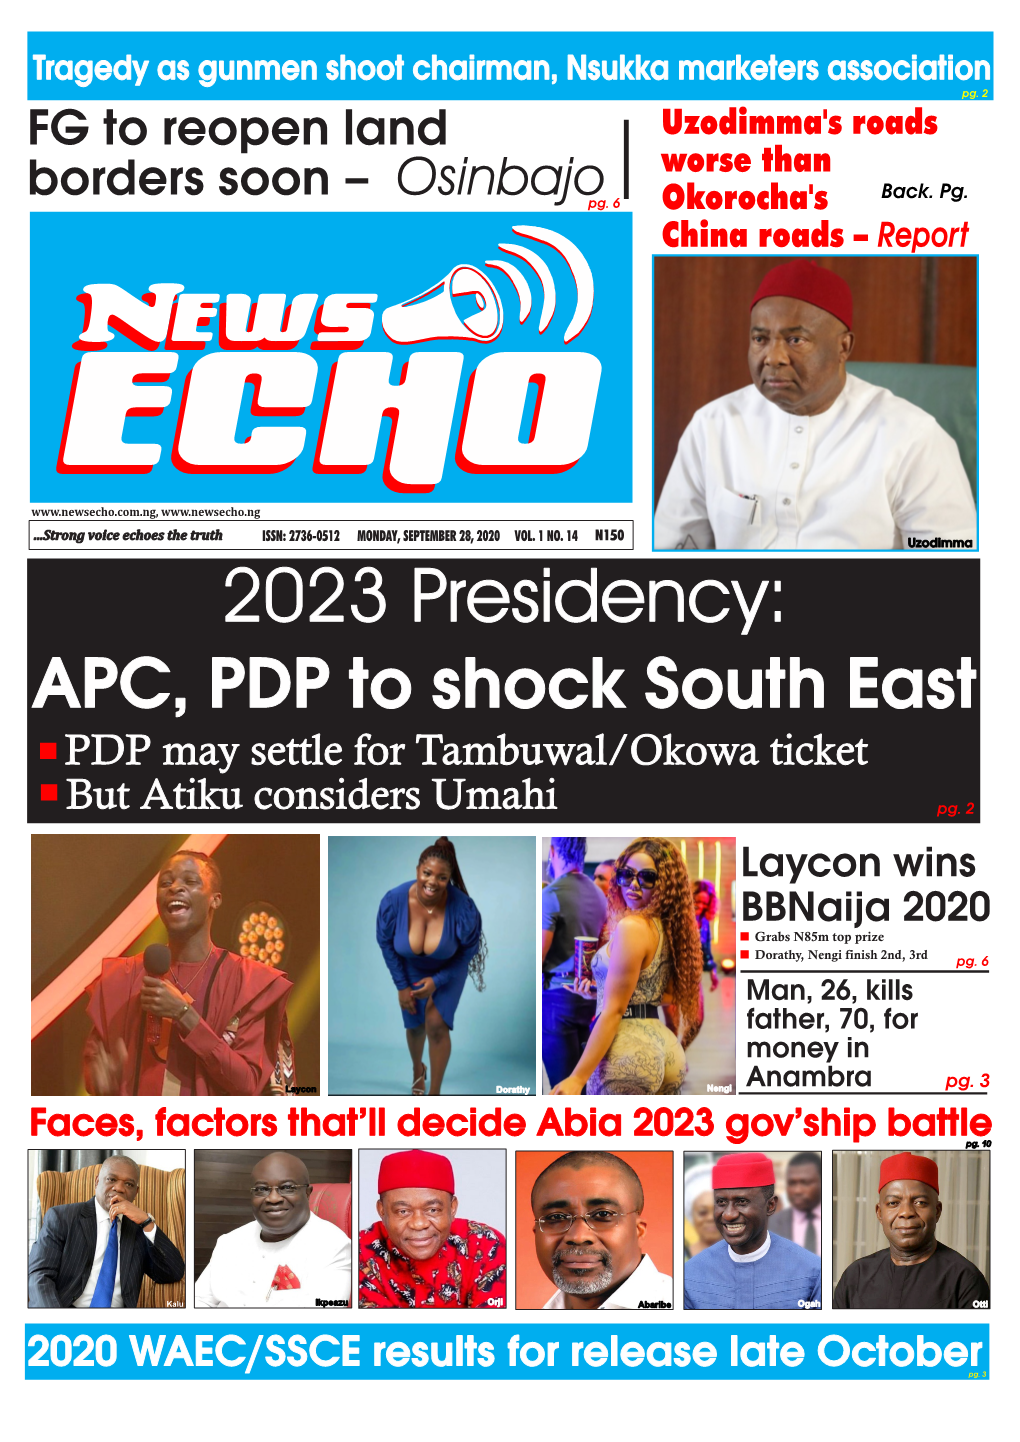 2023 Presidency: APC, PDP to Shock South East PDP May Settle for Tambuwal/Okowa Ticket